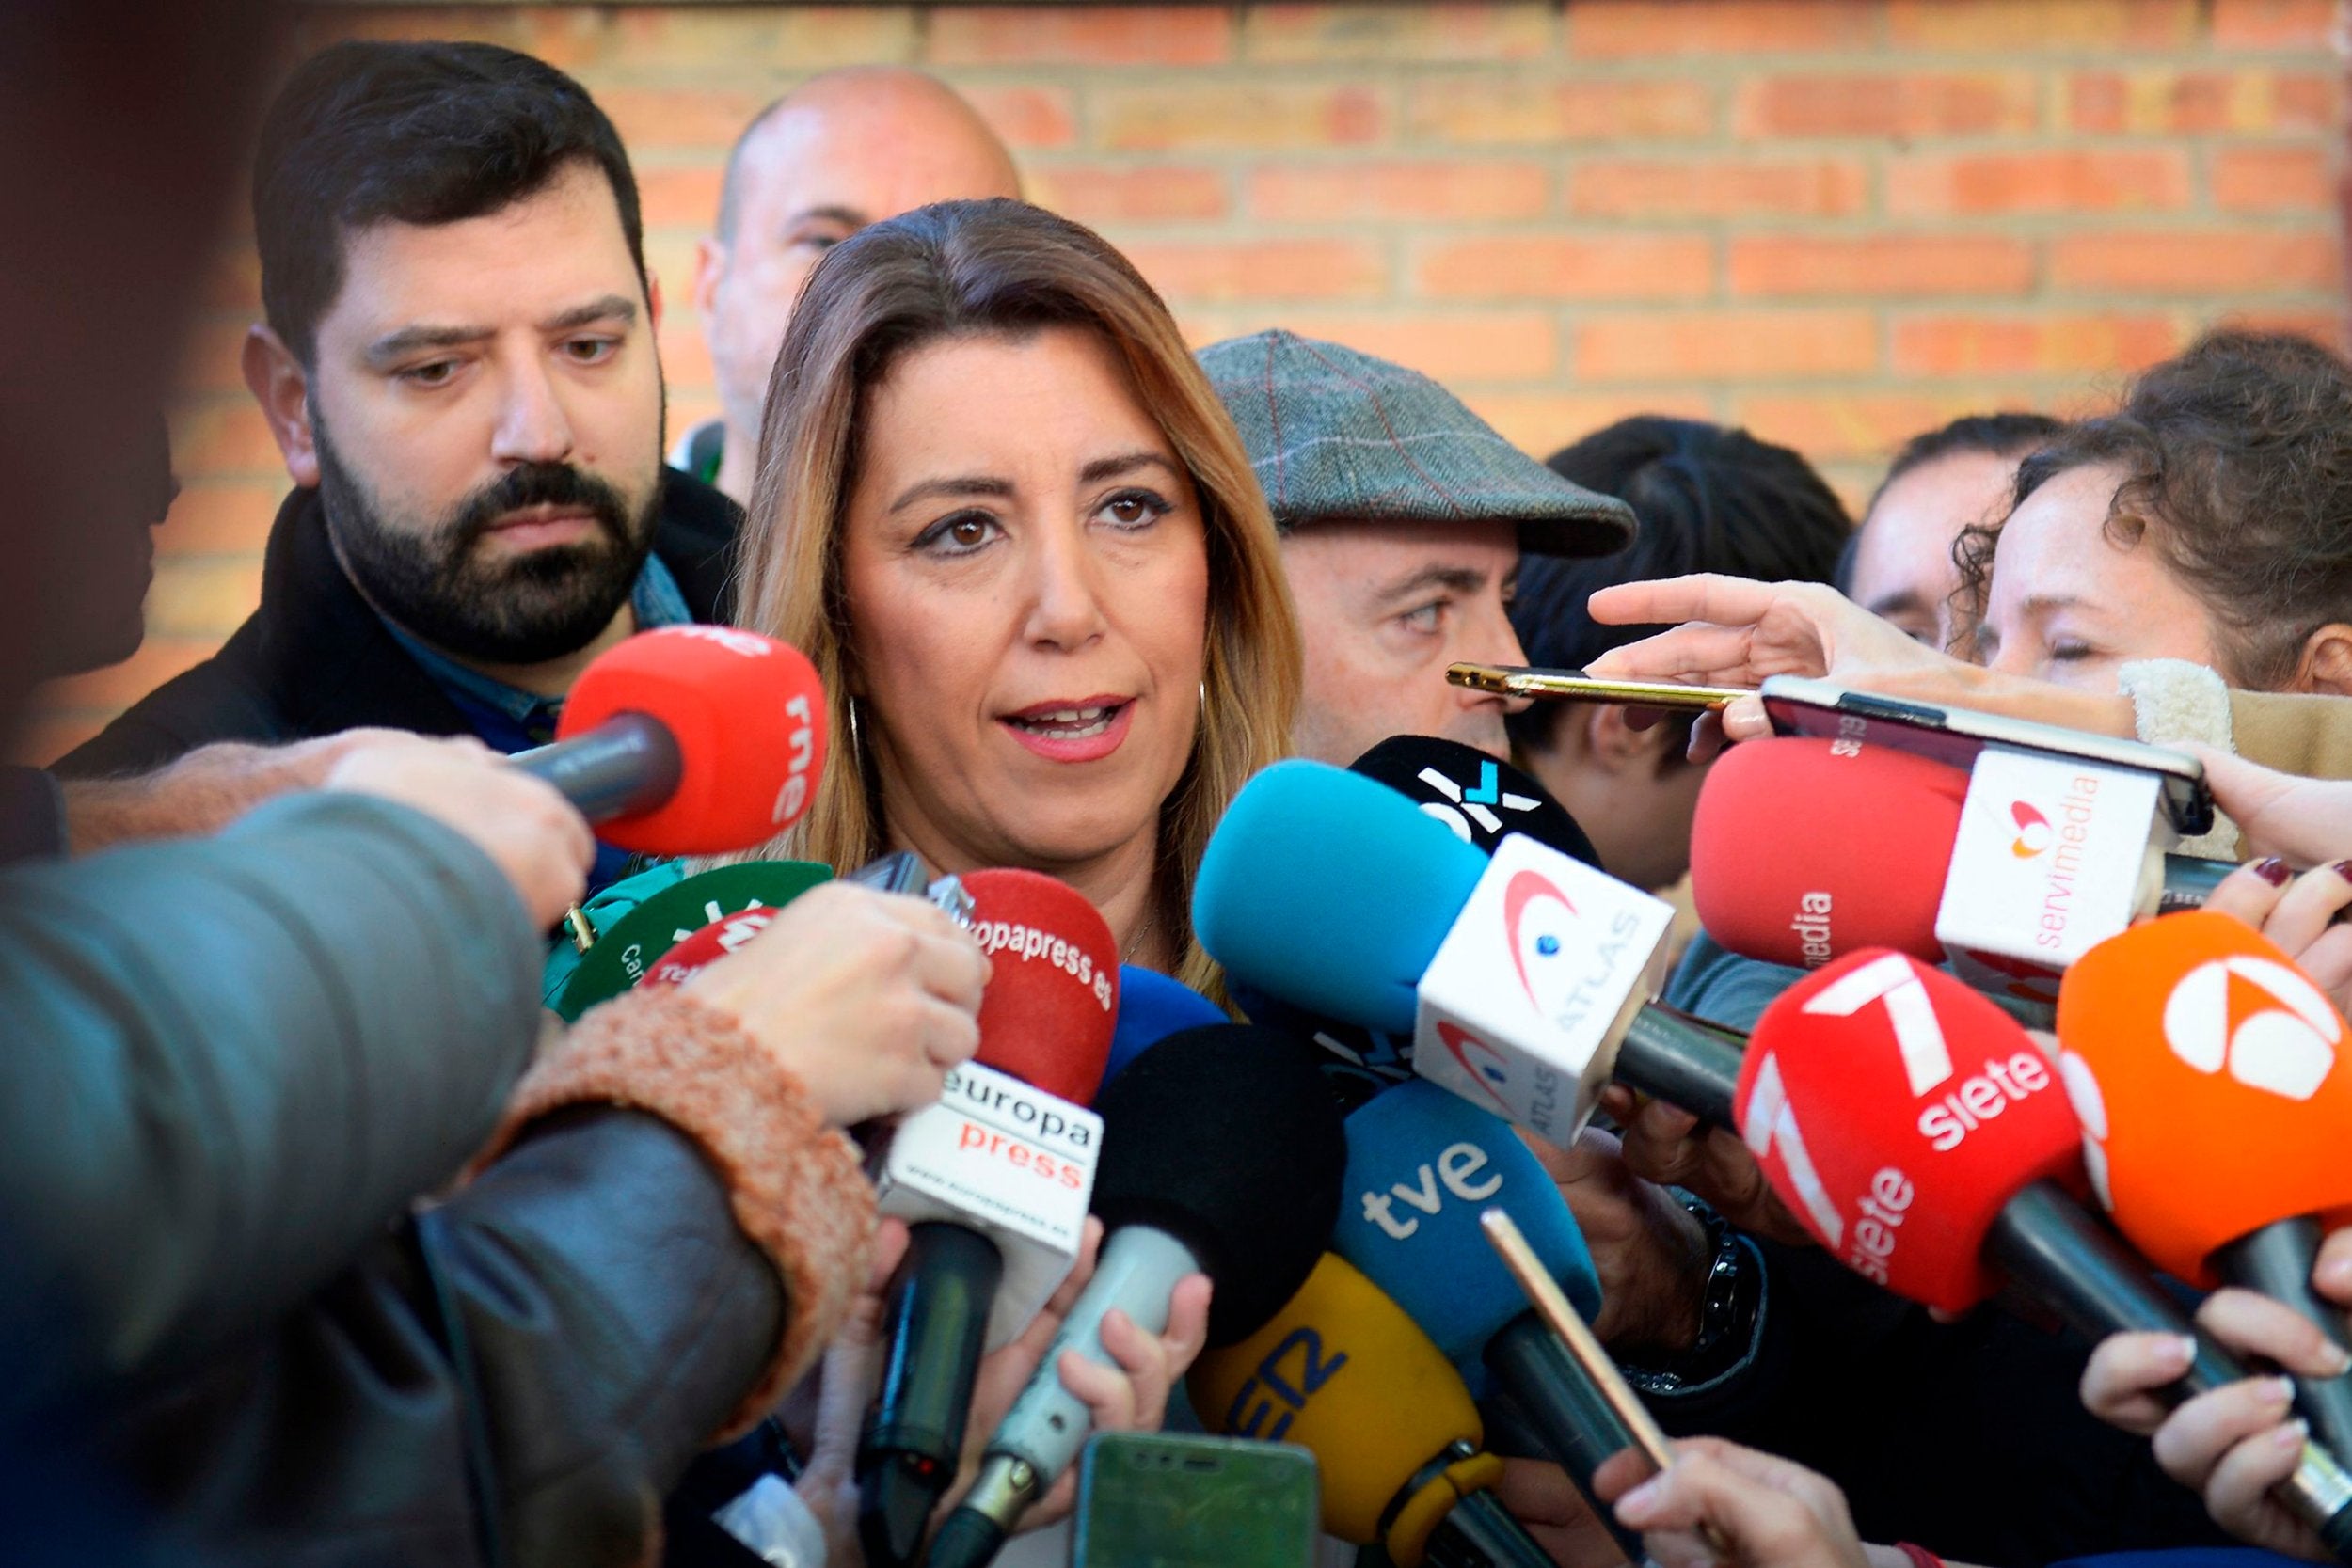 PSOE candidate and current Andalusian regional president Susana Diaz speaks to the press at a polling station in Sevilla (AFP/Getty)